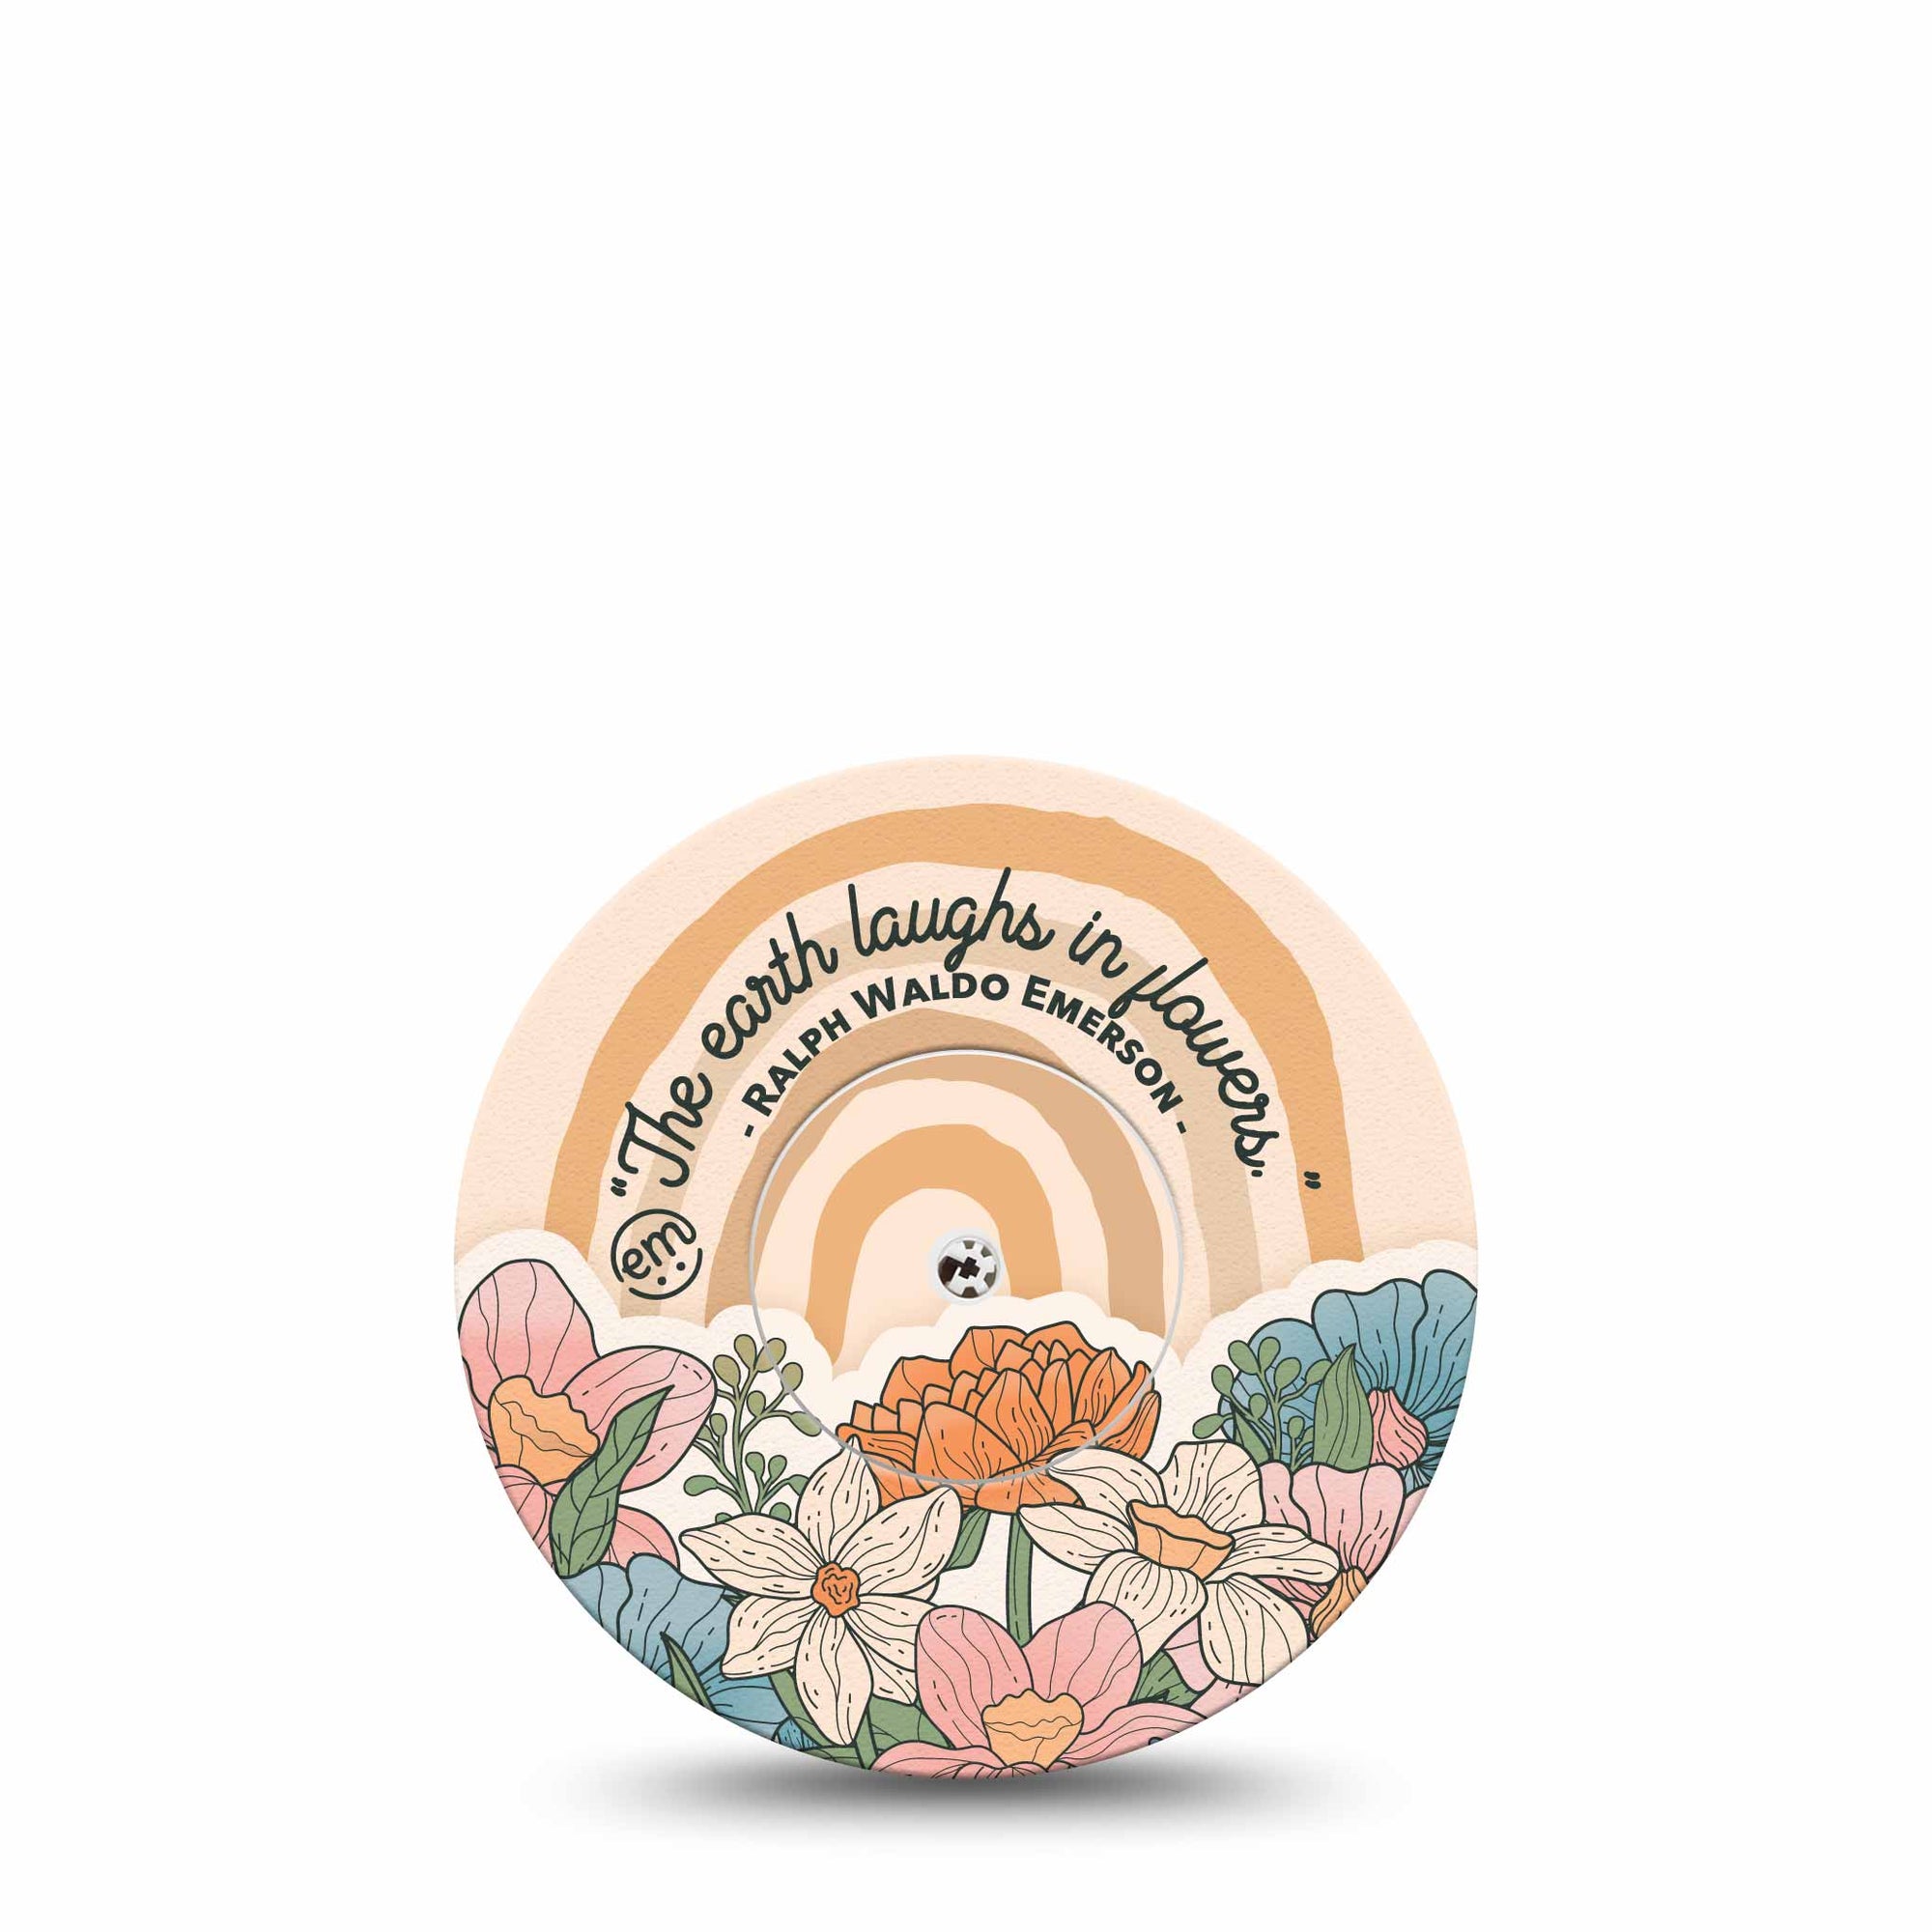 ExpressionMed Laughing Blooms Center Sticker Libre